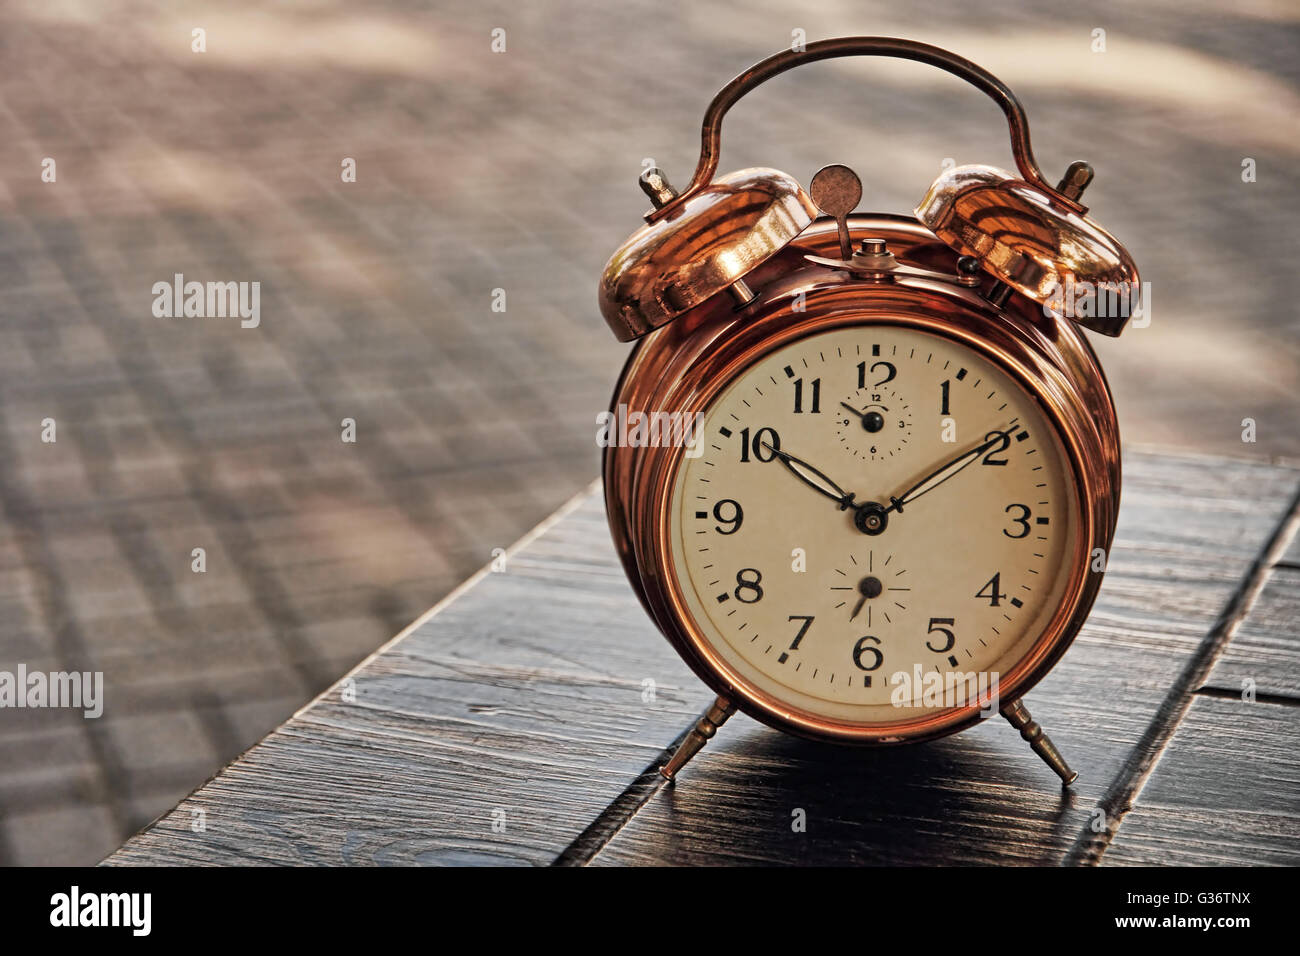 Vintage alarm clock on table and blurry background. Stock Photo